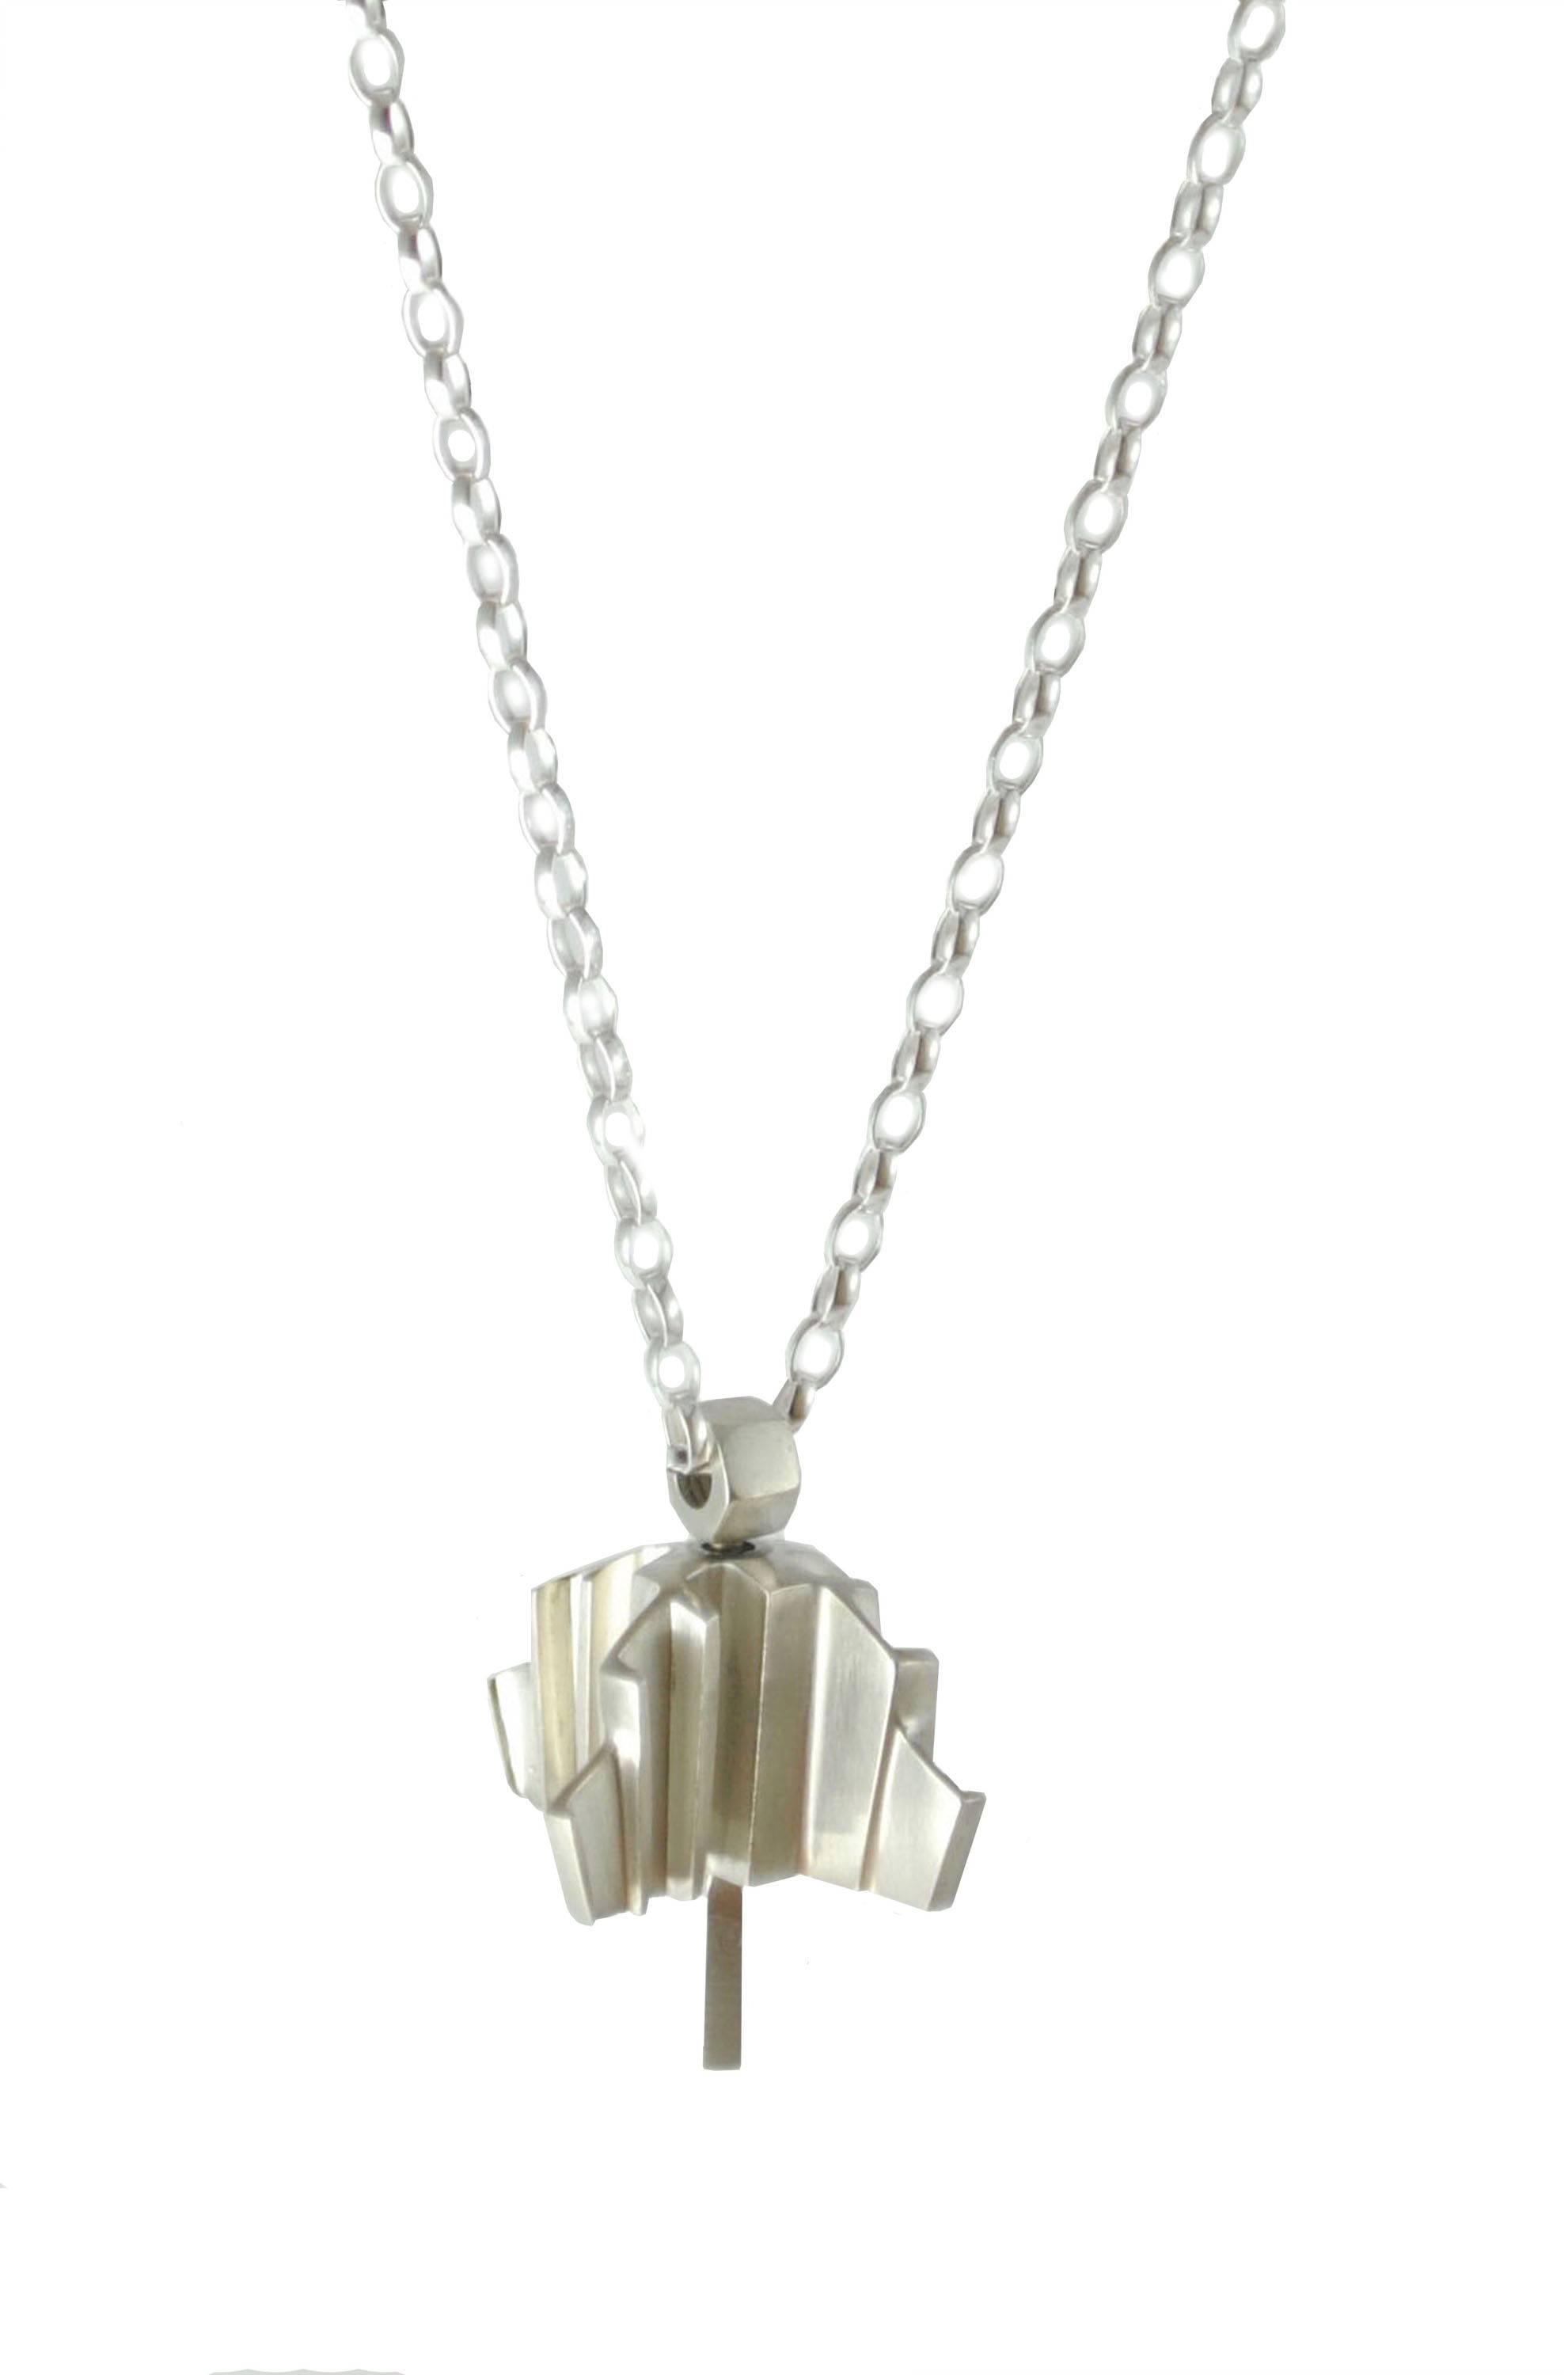 With a sculptural weight, this architectural and angular sterling silver pendant rotates while showing off the bold and inverted cavities. A four sided architectural visual delight, the original design is a beauty to wear.

Available in 18 carat